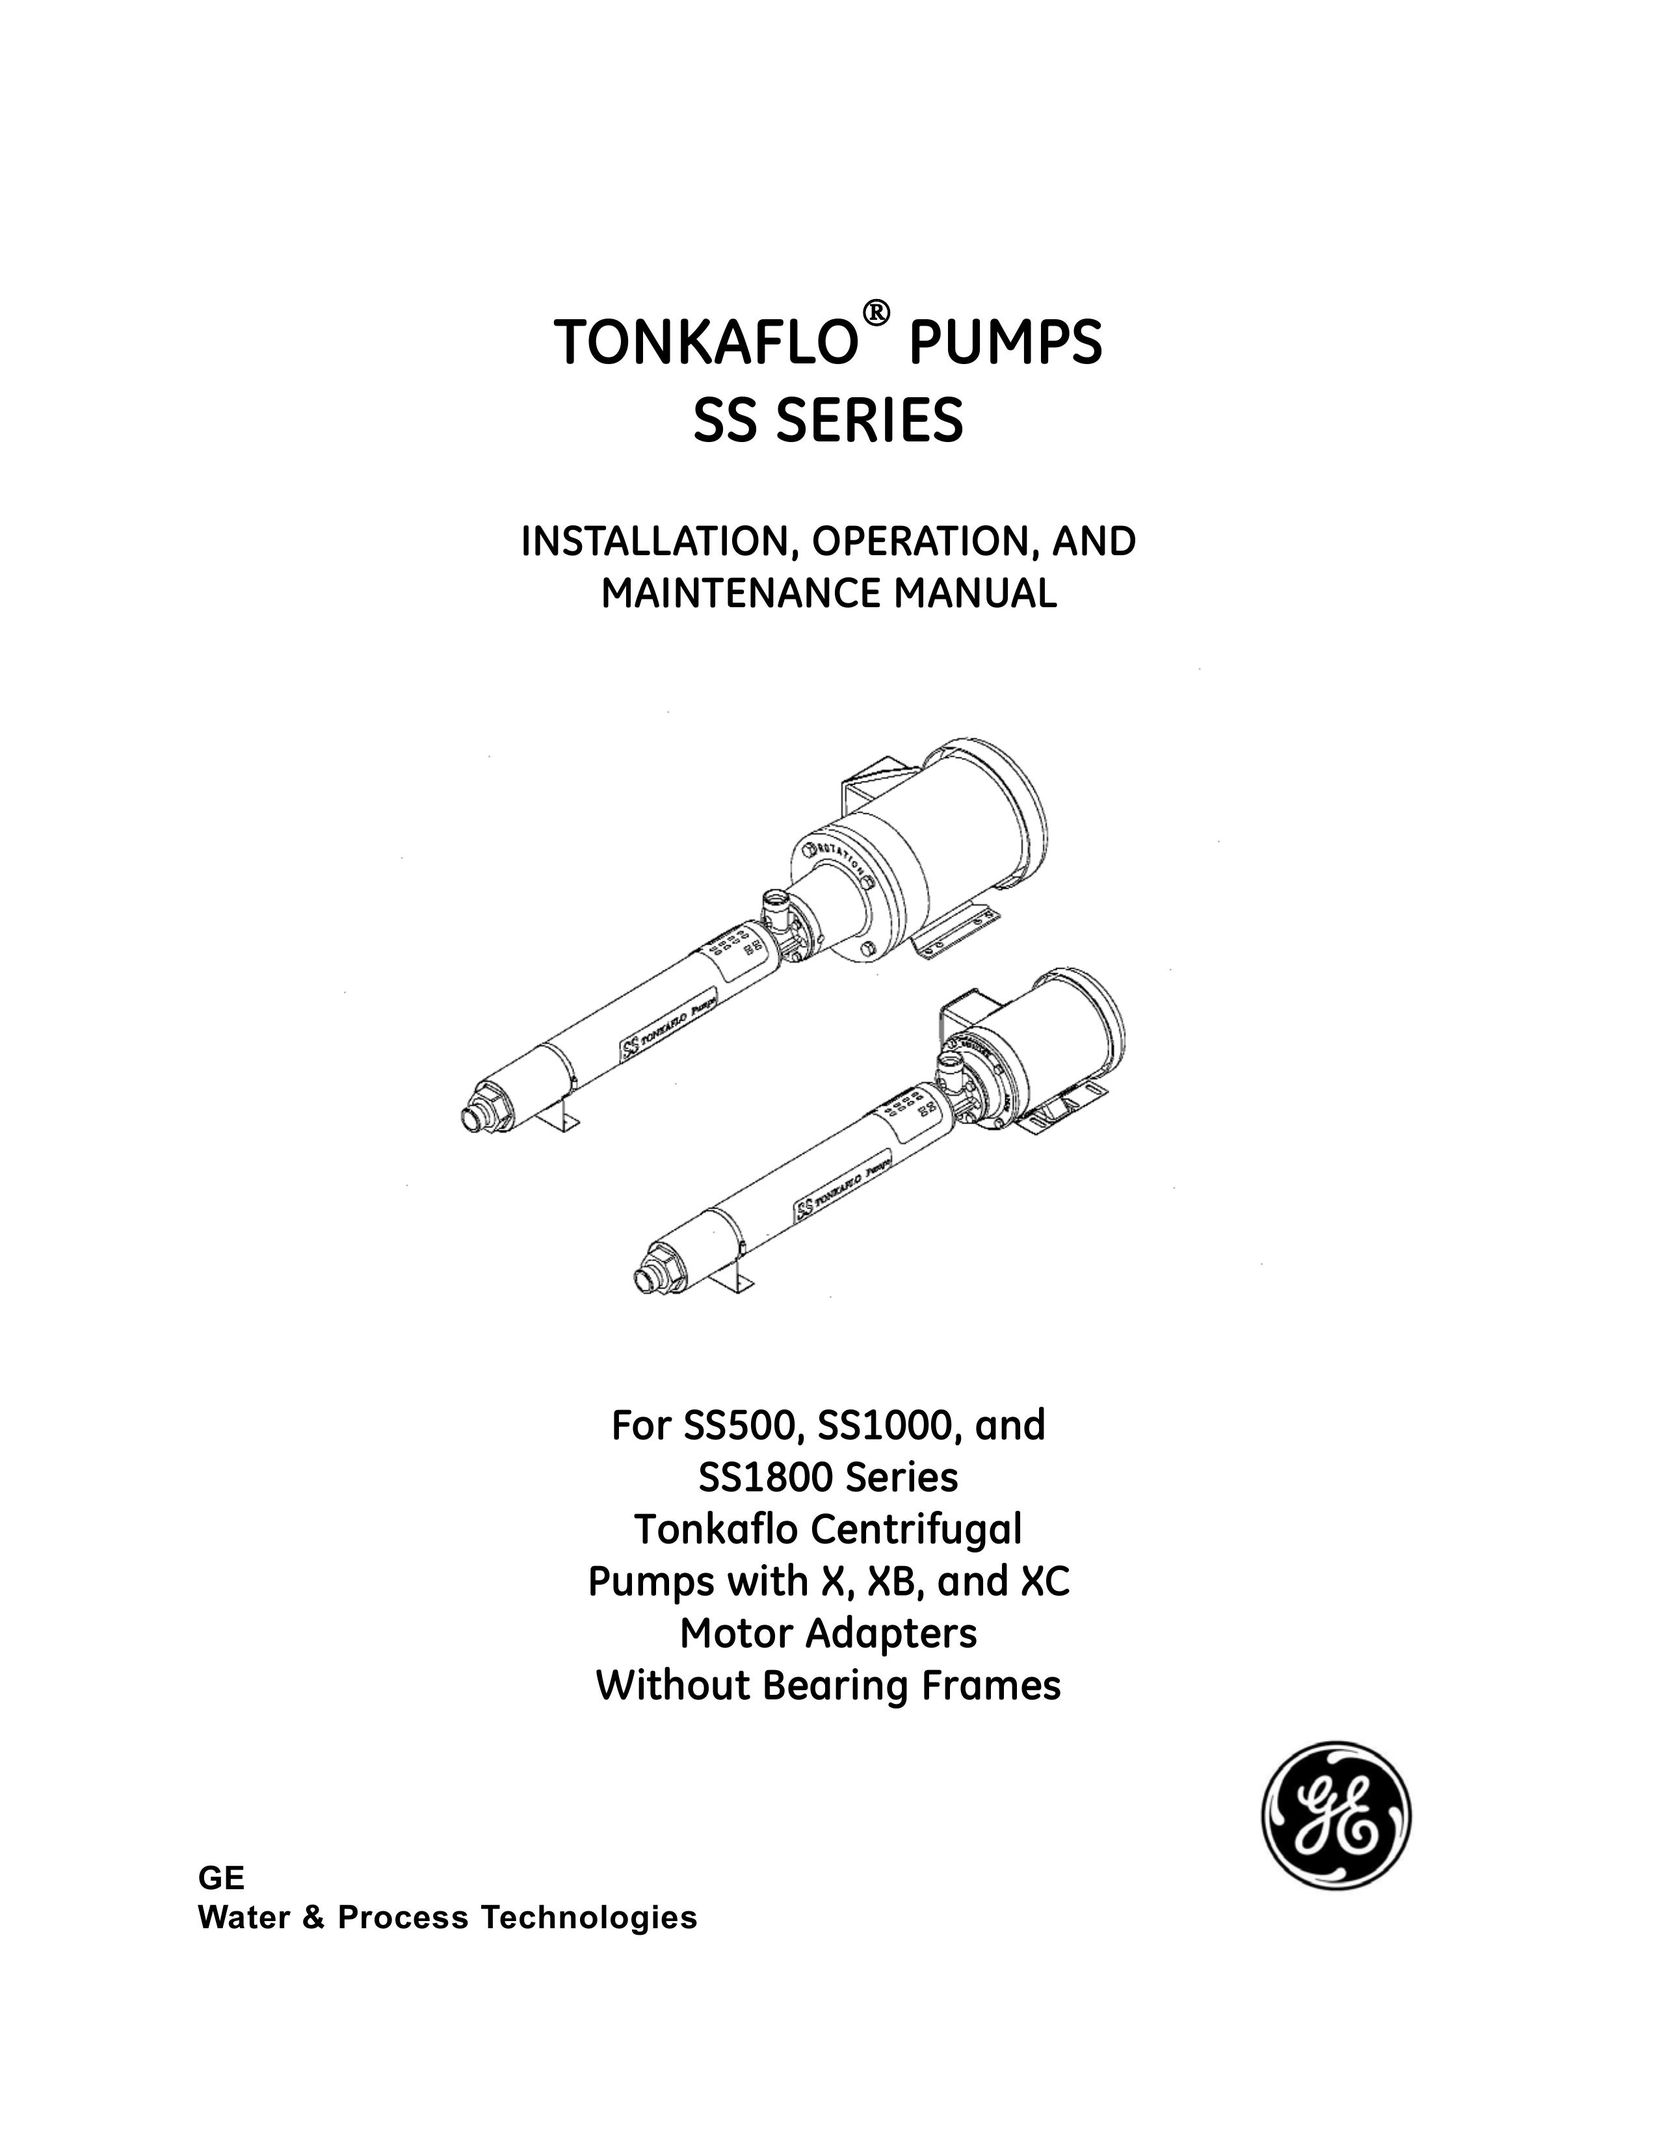 GE SS1000 Septic System User Manual